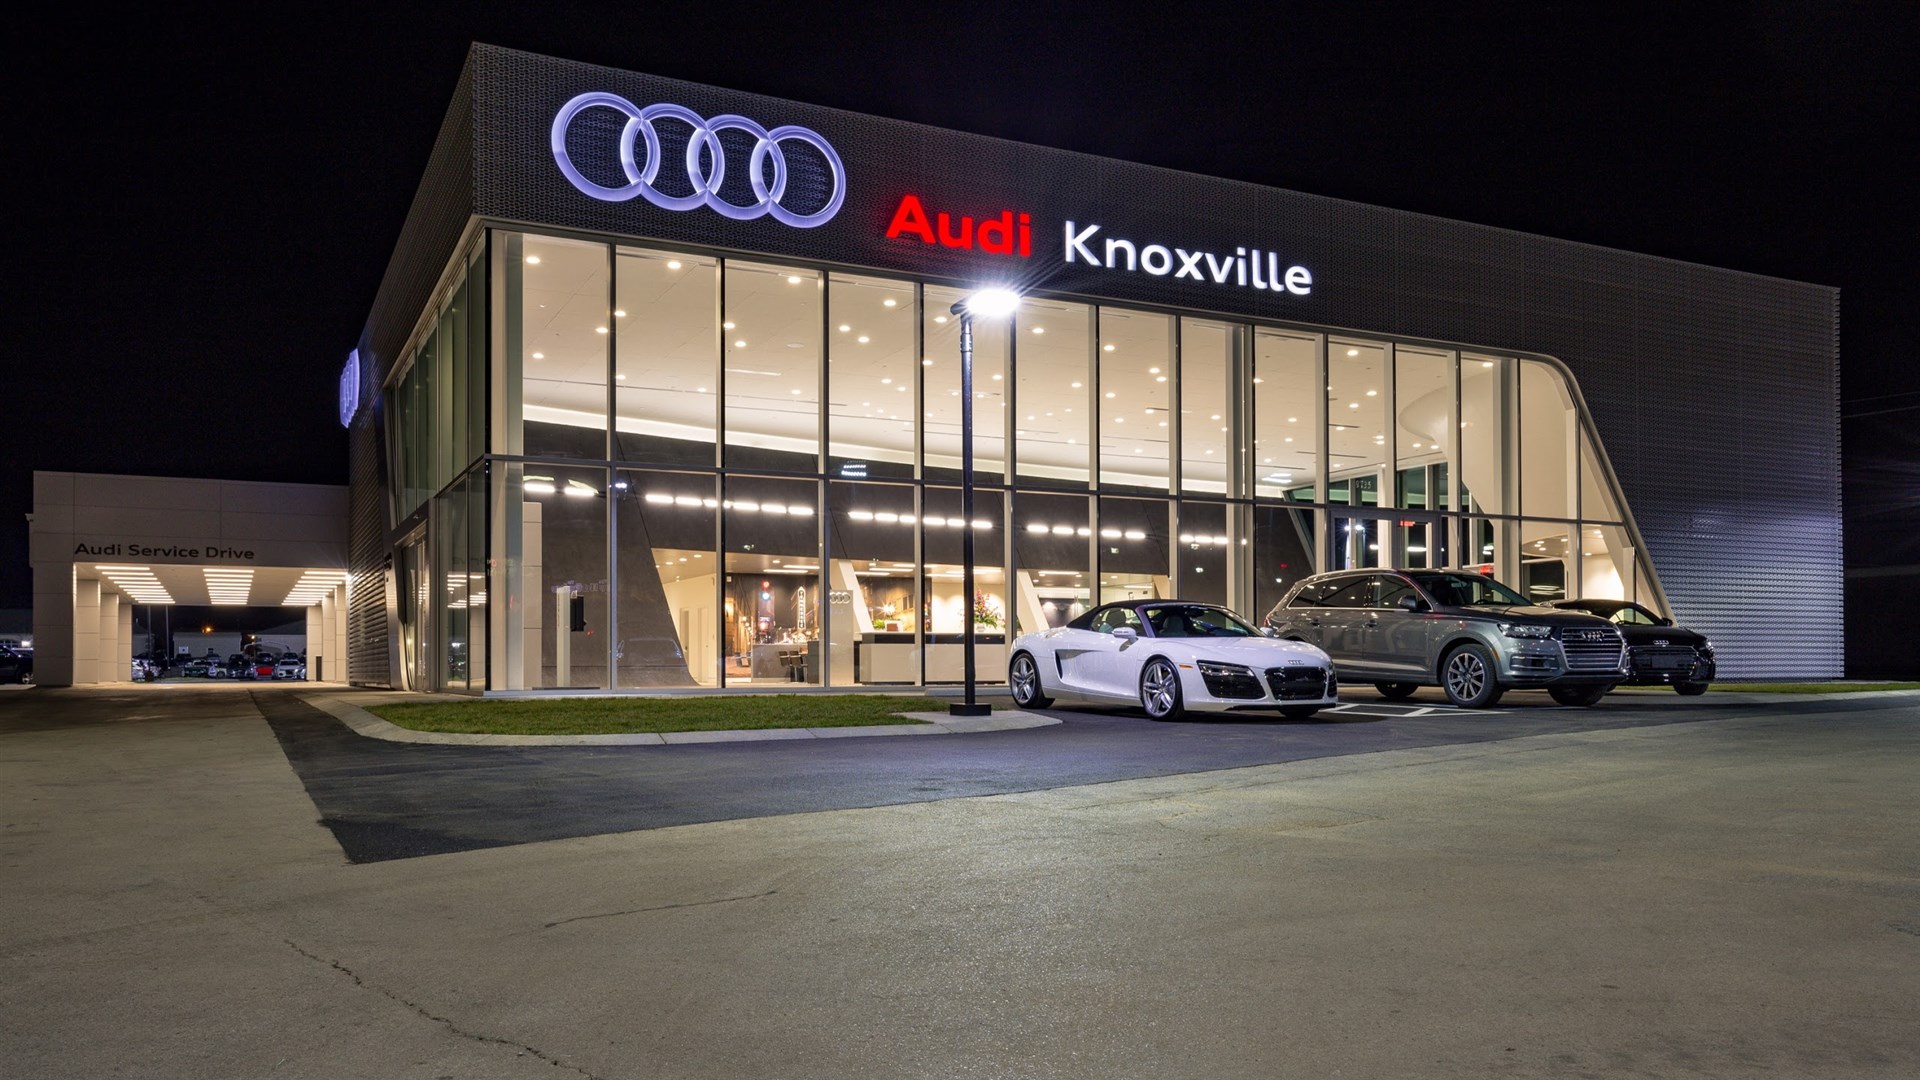 Audi Knoxville